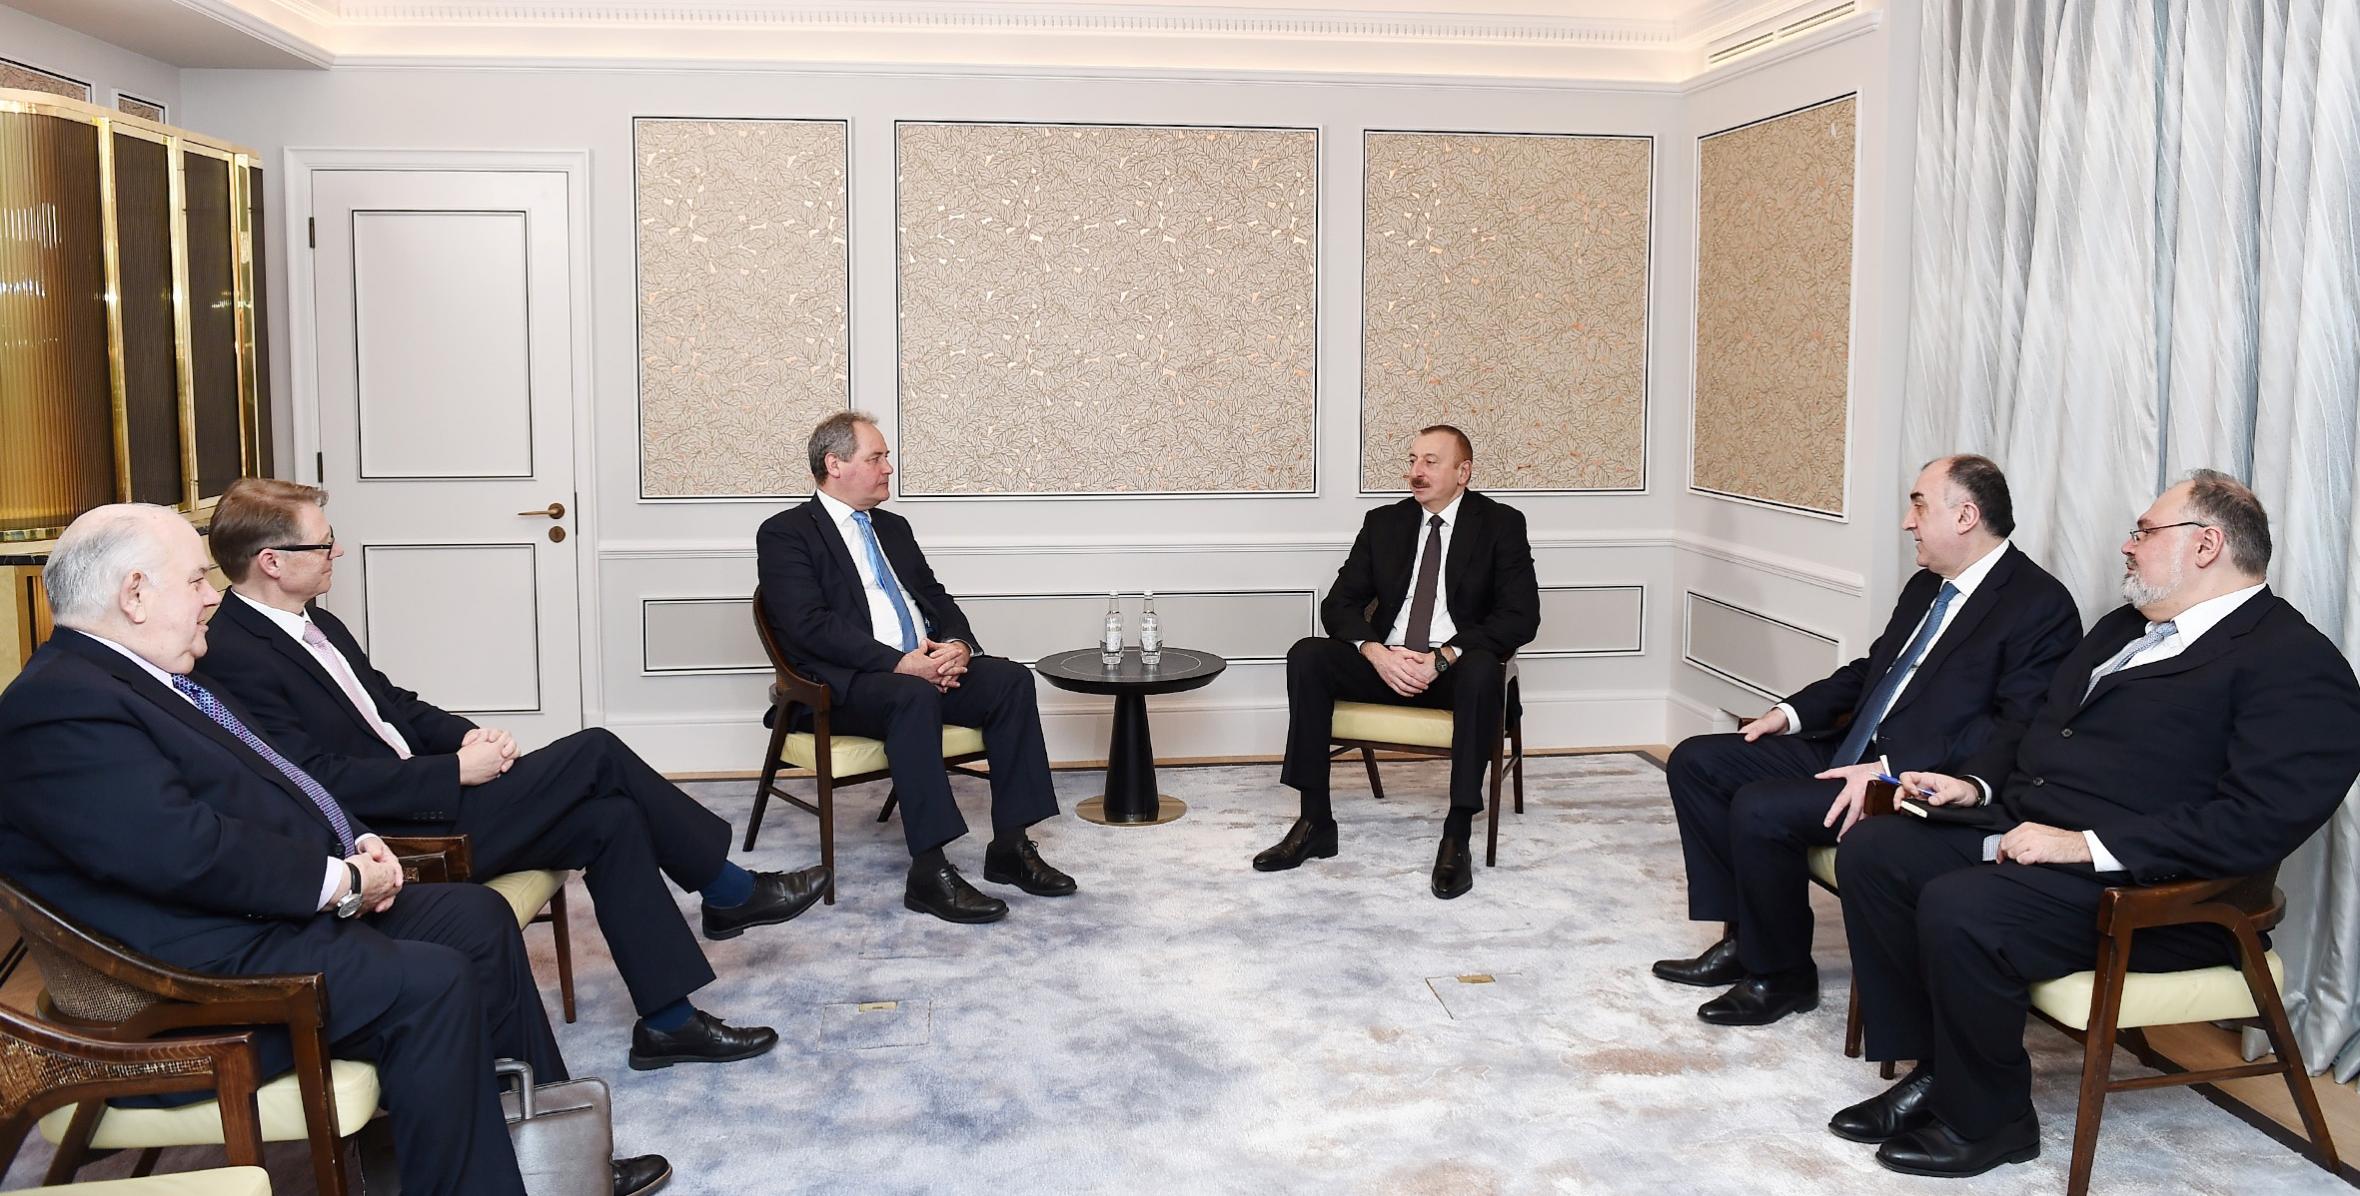 Ilham Aliyev met with a group of British MPs in London